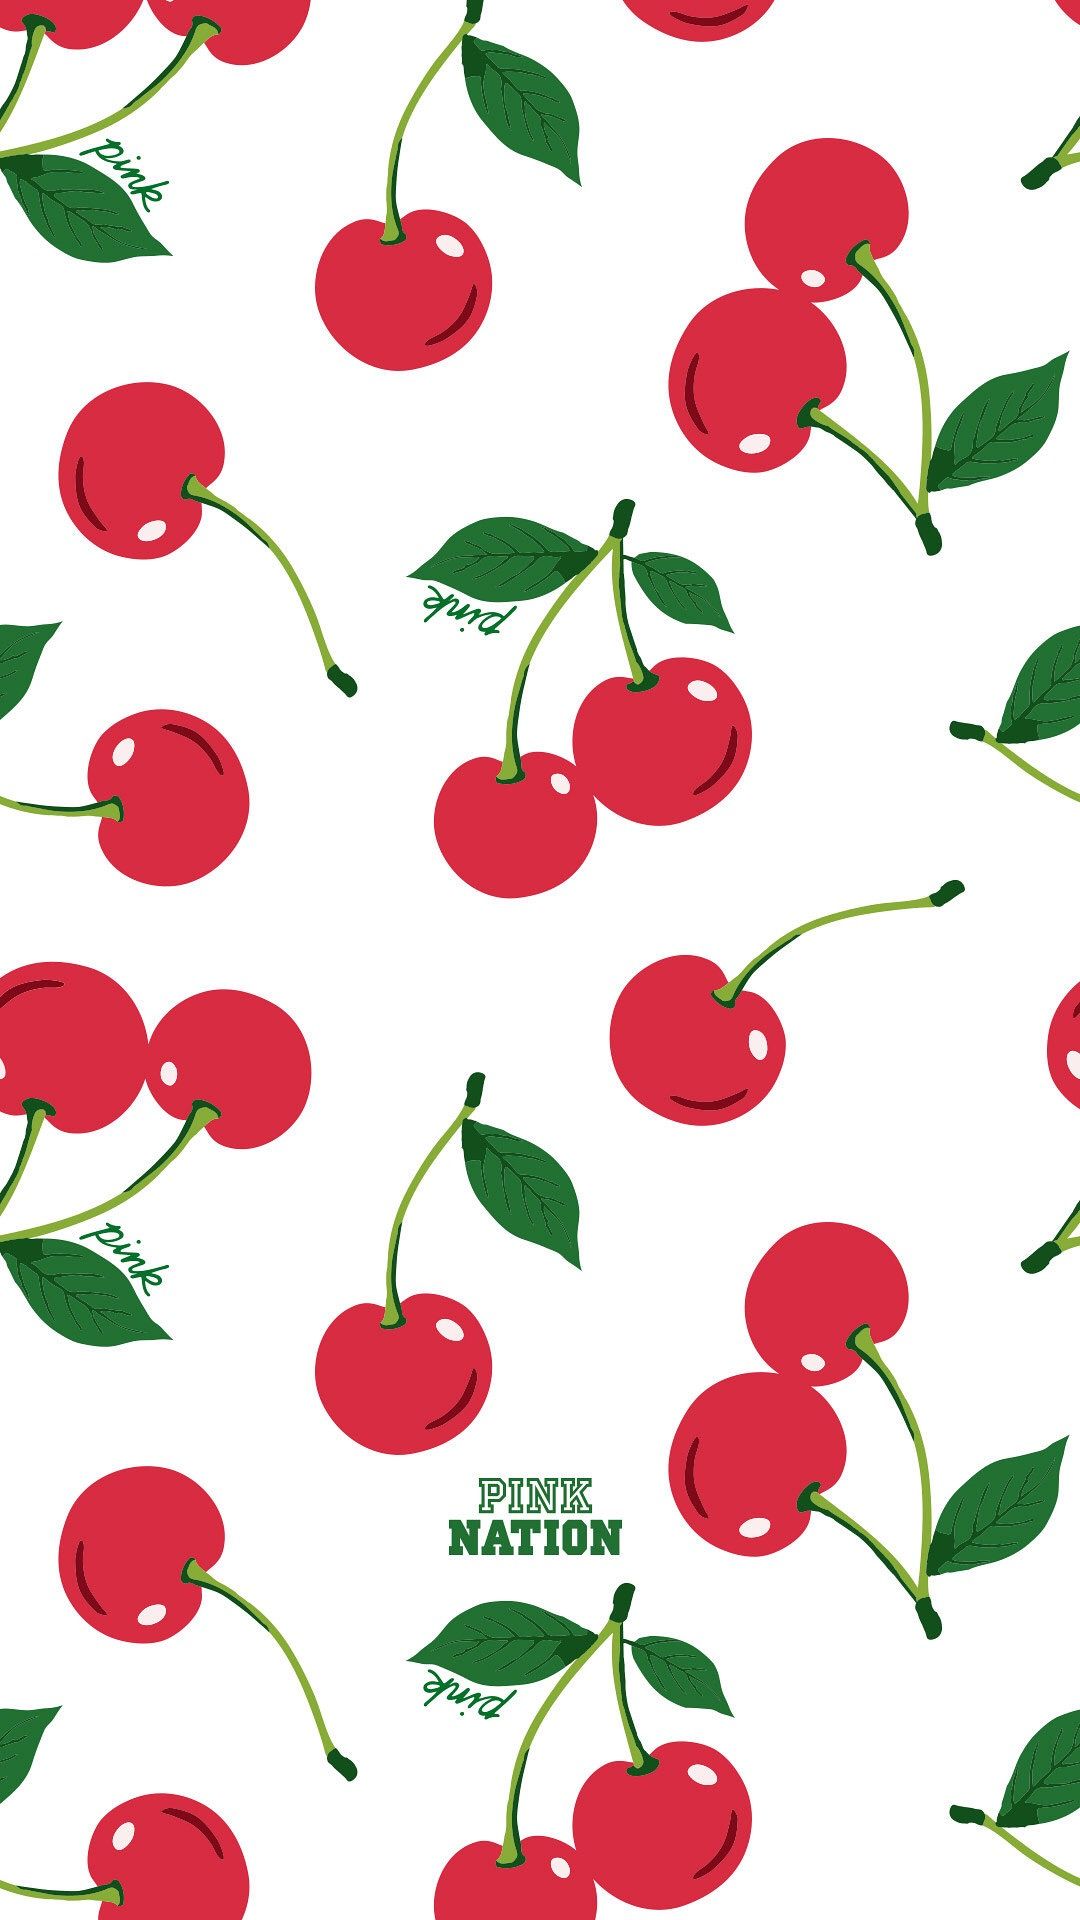 Cherry Wallpaper Kolpaper Awesome Free Hd Wallpapers View and download our high definition cherry wallpaper. cherry wallpaper kolpaper awesome